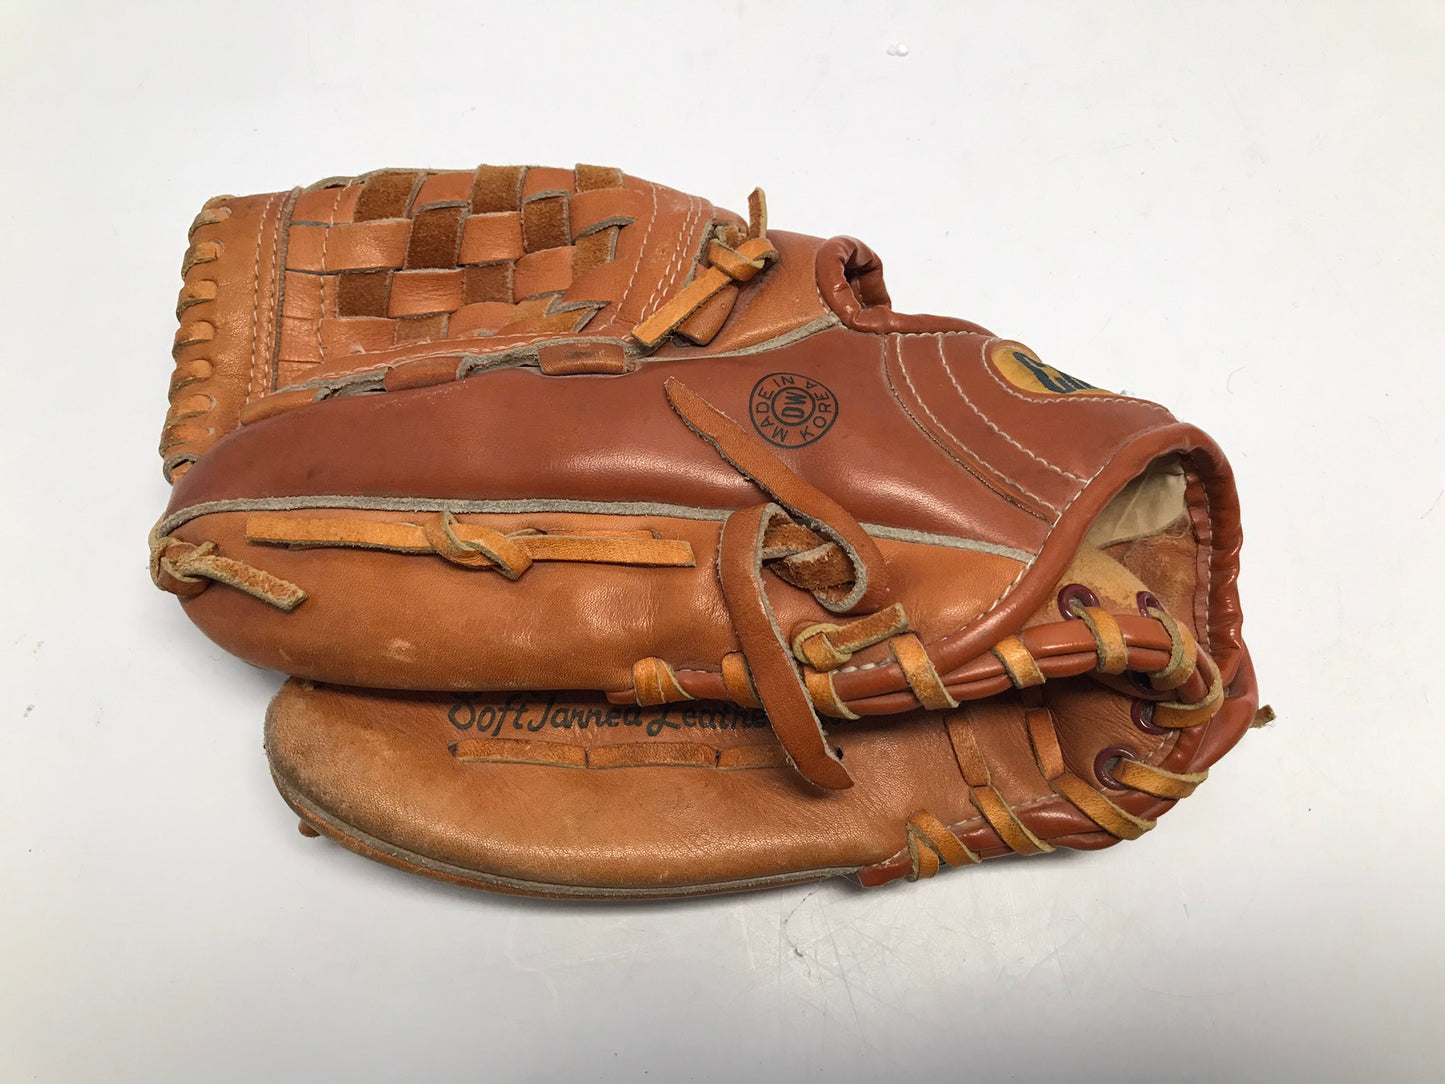 Baseball Glove Child Size 11 Inch Cooper Leather Fits On Right Hand